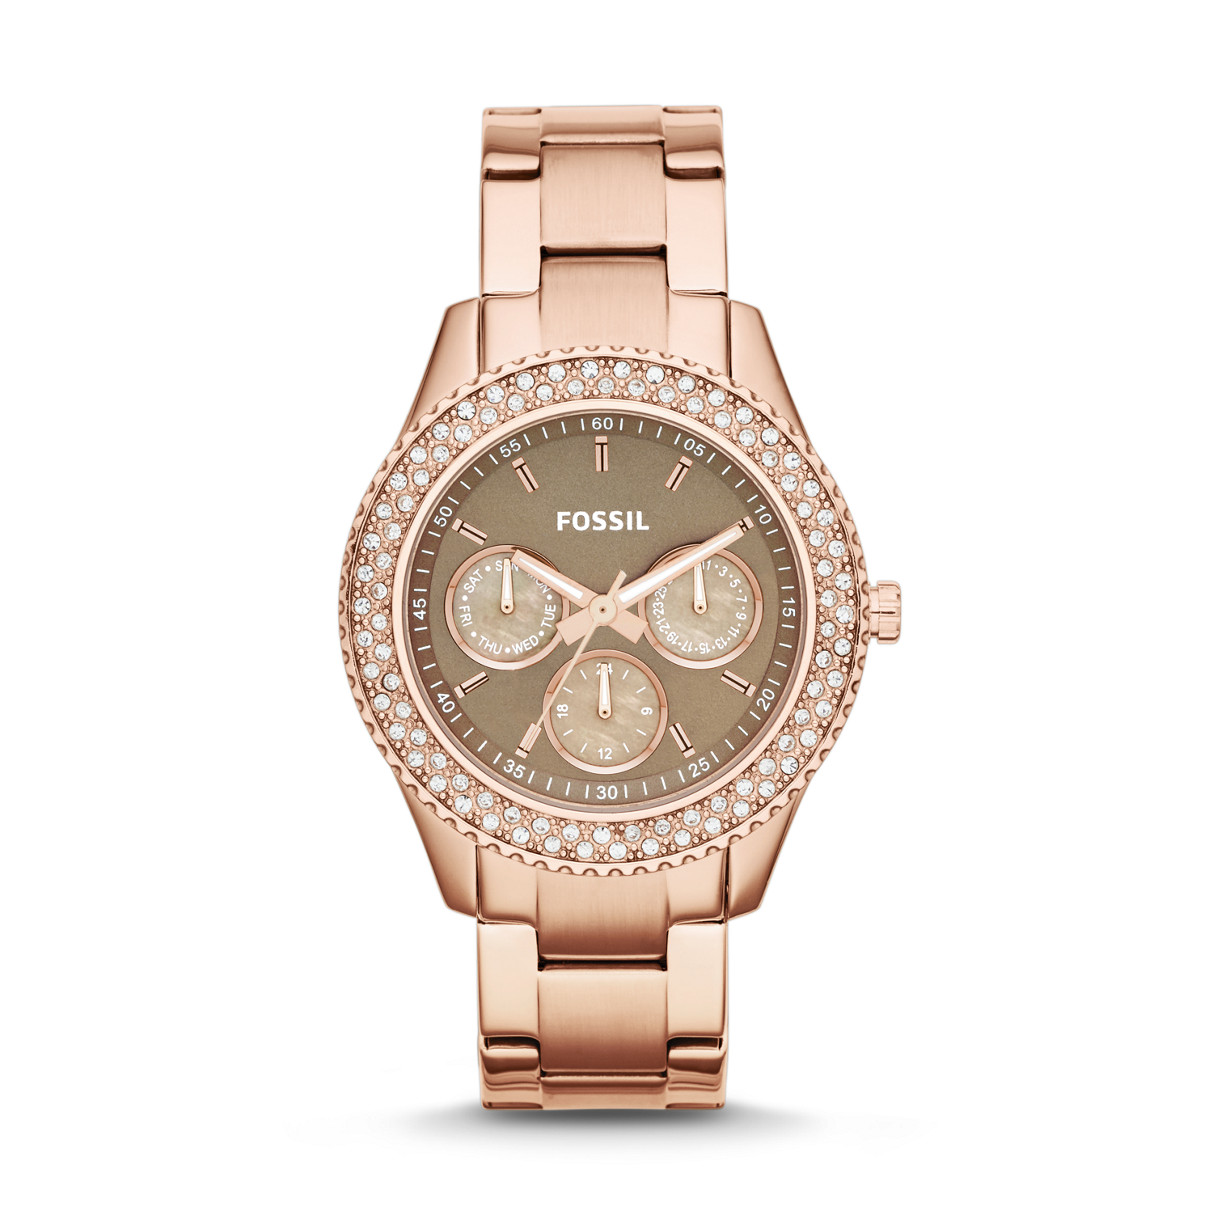 USA Boutique: Fossil Stella Multifunction Stainless Steel Watch - Rose Gold